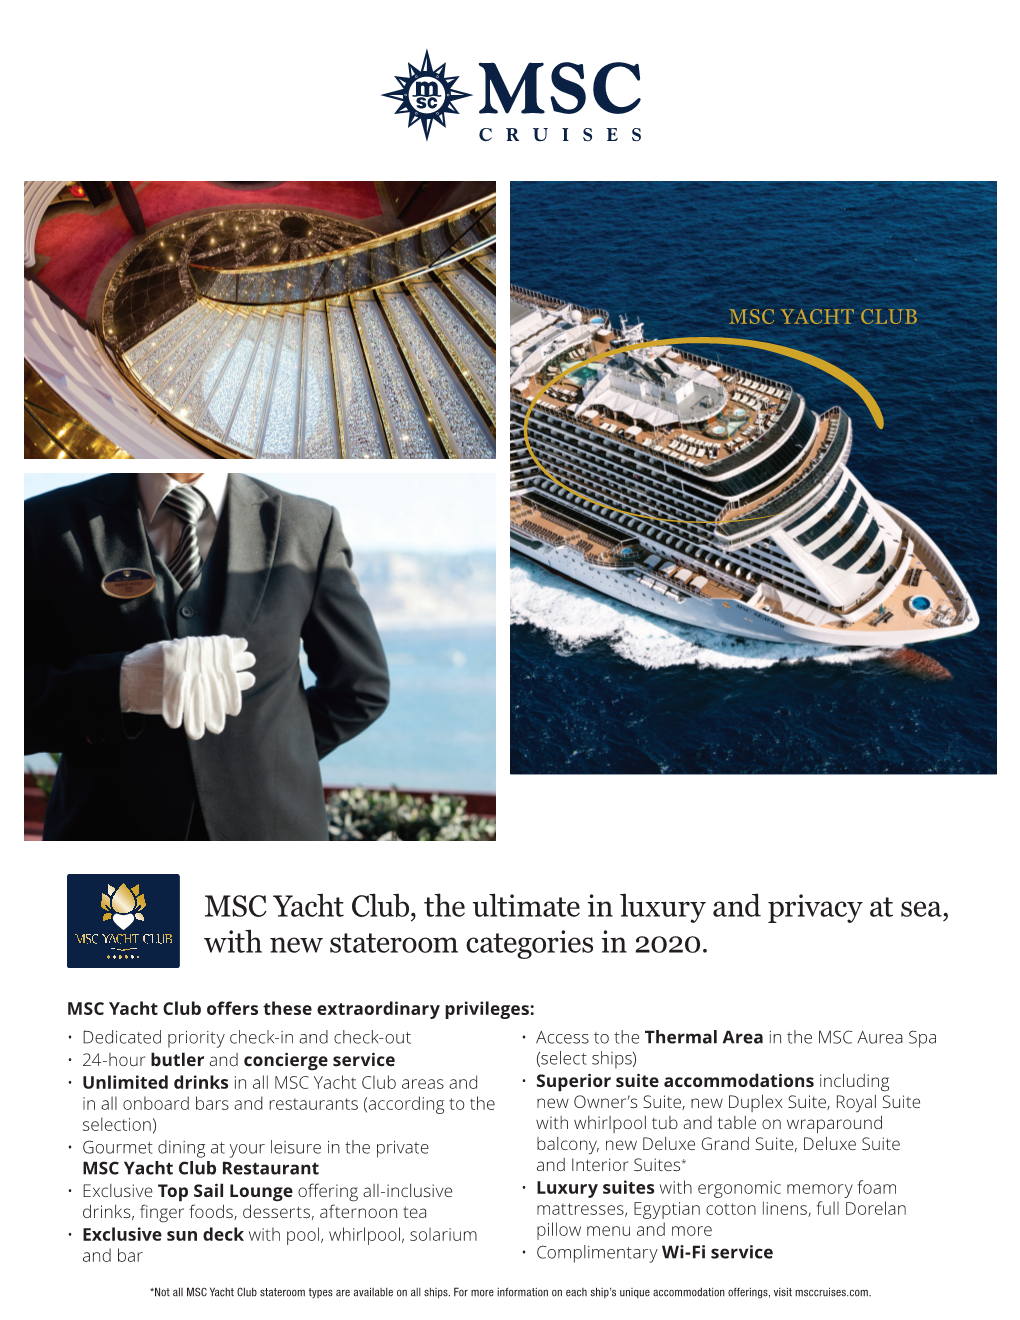 MSC Yacht Club, the Ultimate in Luxury and Privacy at Sea, with New Stateroom Categories in 2020